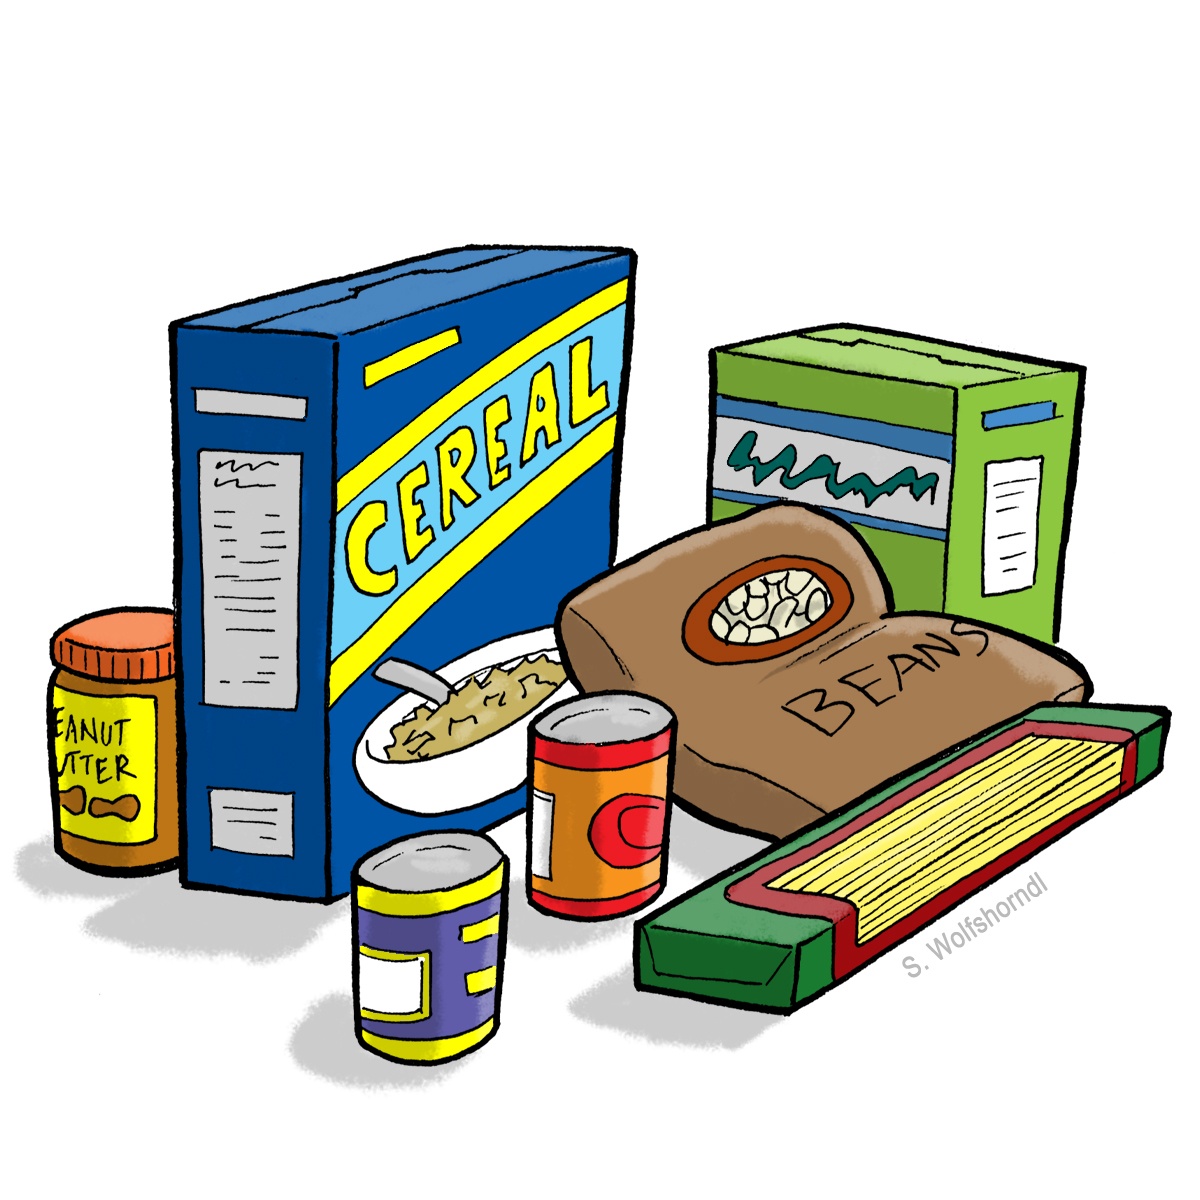 Canned Food Clipart | Clipart Panda - Free Clipart Images